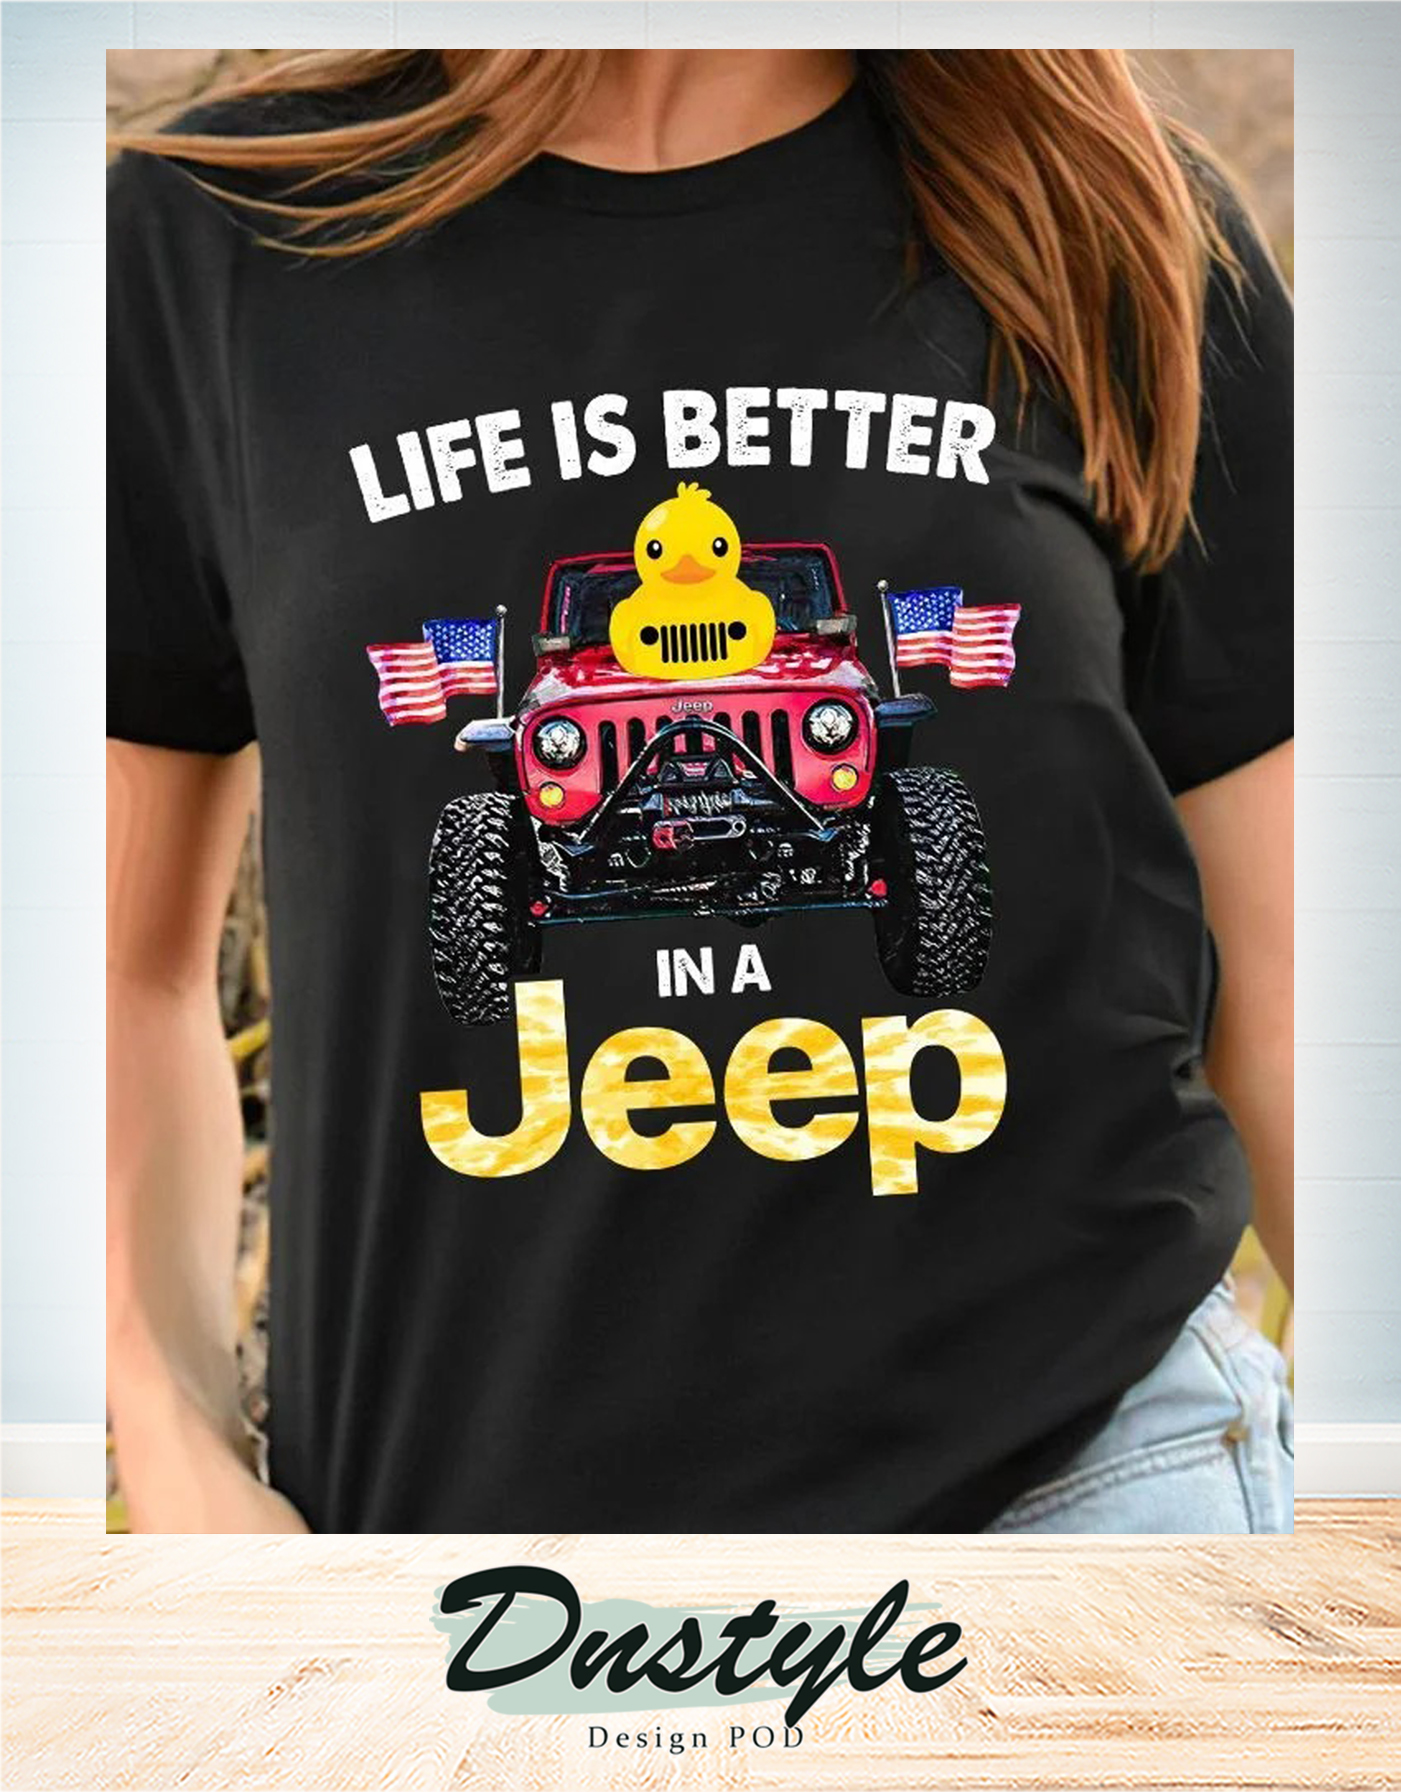 Duck duck life is better in a jeep american flag t-shirt